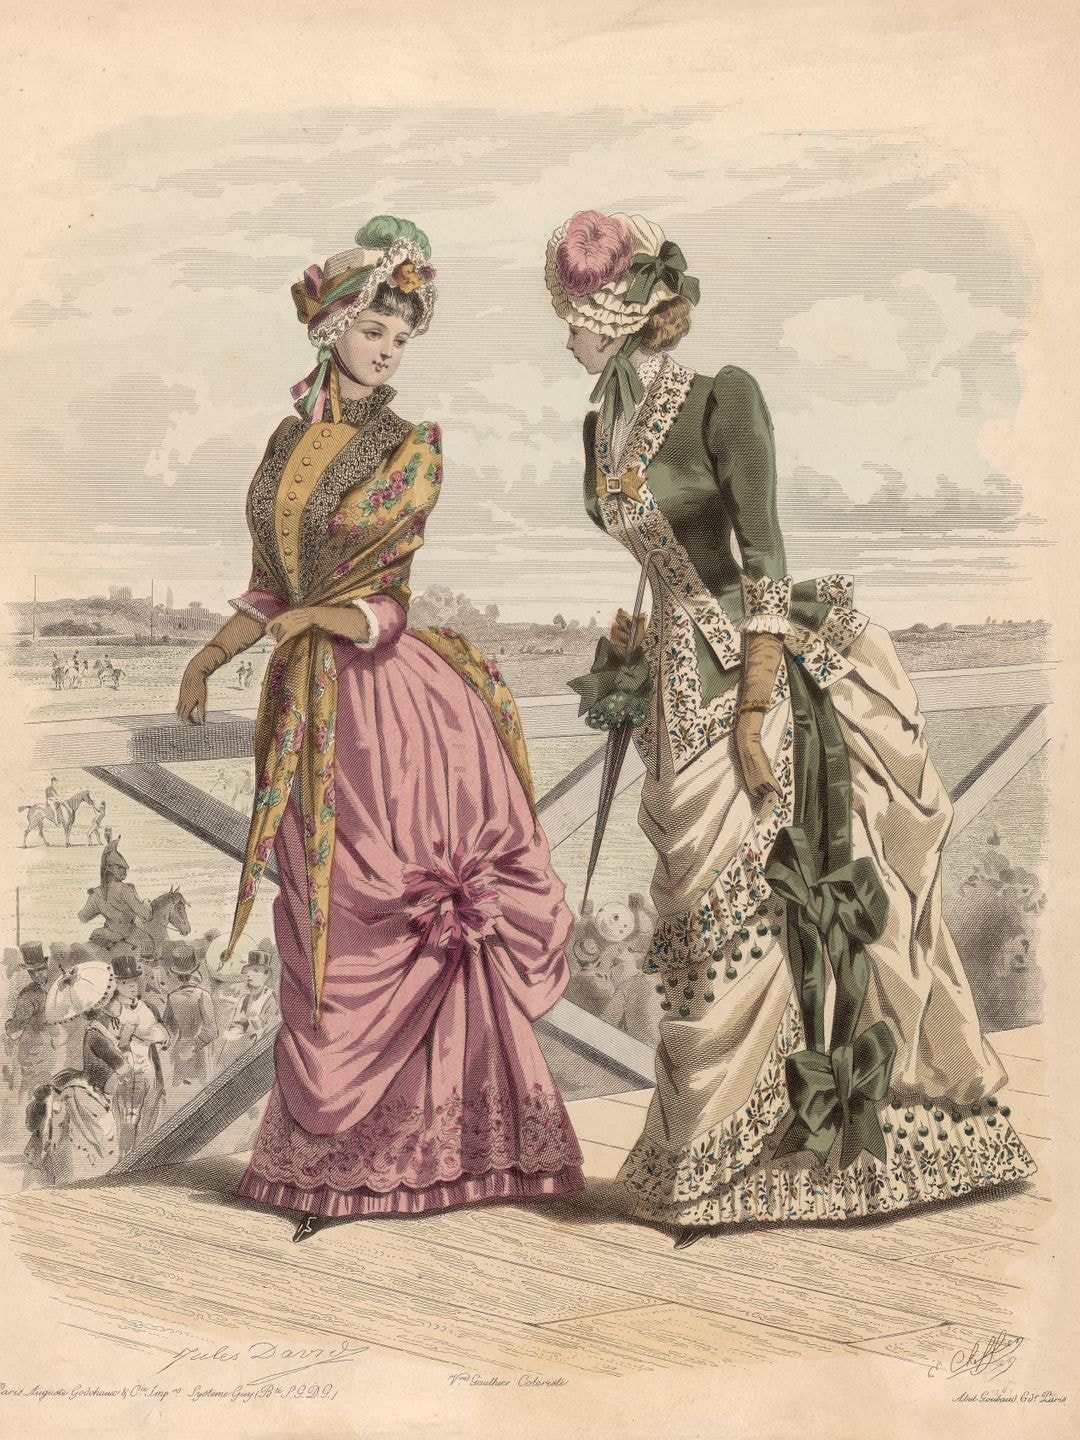 Illustration depicting two women, each wearing ornate flowing gowns, at Ascot Racecourse in Berkshire, England, Great Britain, 1880. Both women, each wearing a bonnet, are standing on a balcony overlooking a crowd watching the racing. By Jules David. (Photo by Hulton H Colour/Getty Images) (Photo by Edward Gooch Collection/Hulton Archive/Getty Images)